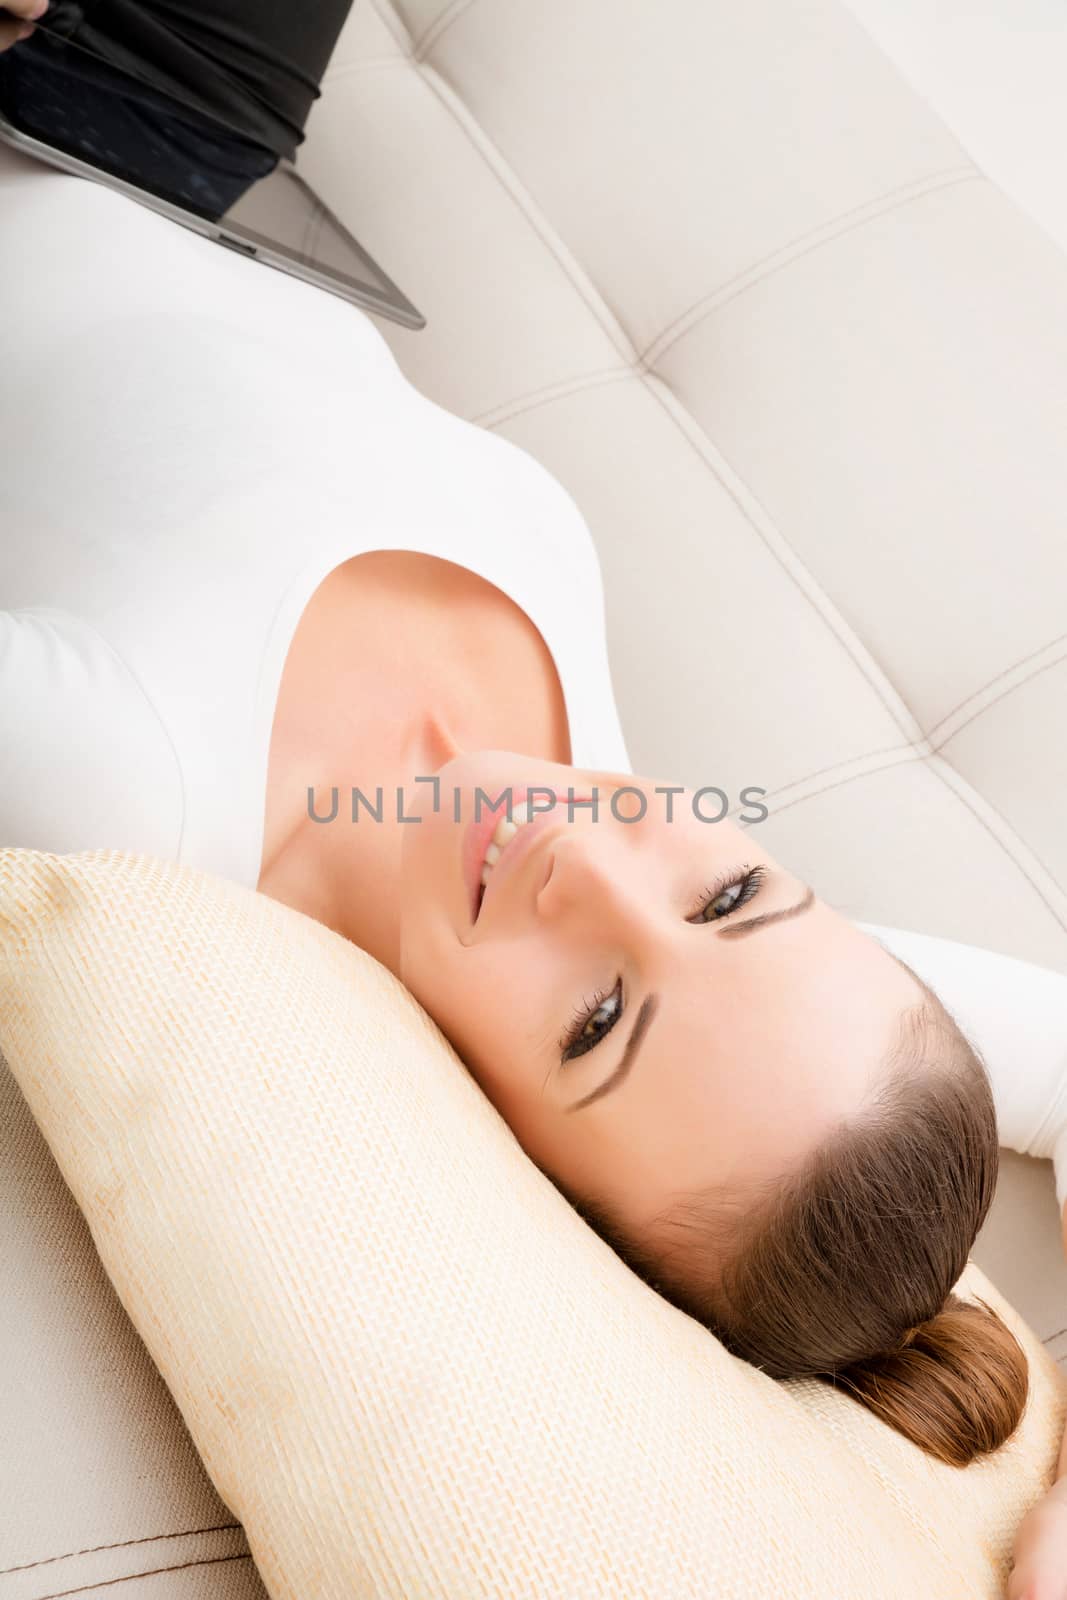 Young woman with a Tablet PC on the Sofa by Spectral